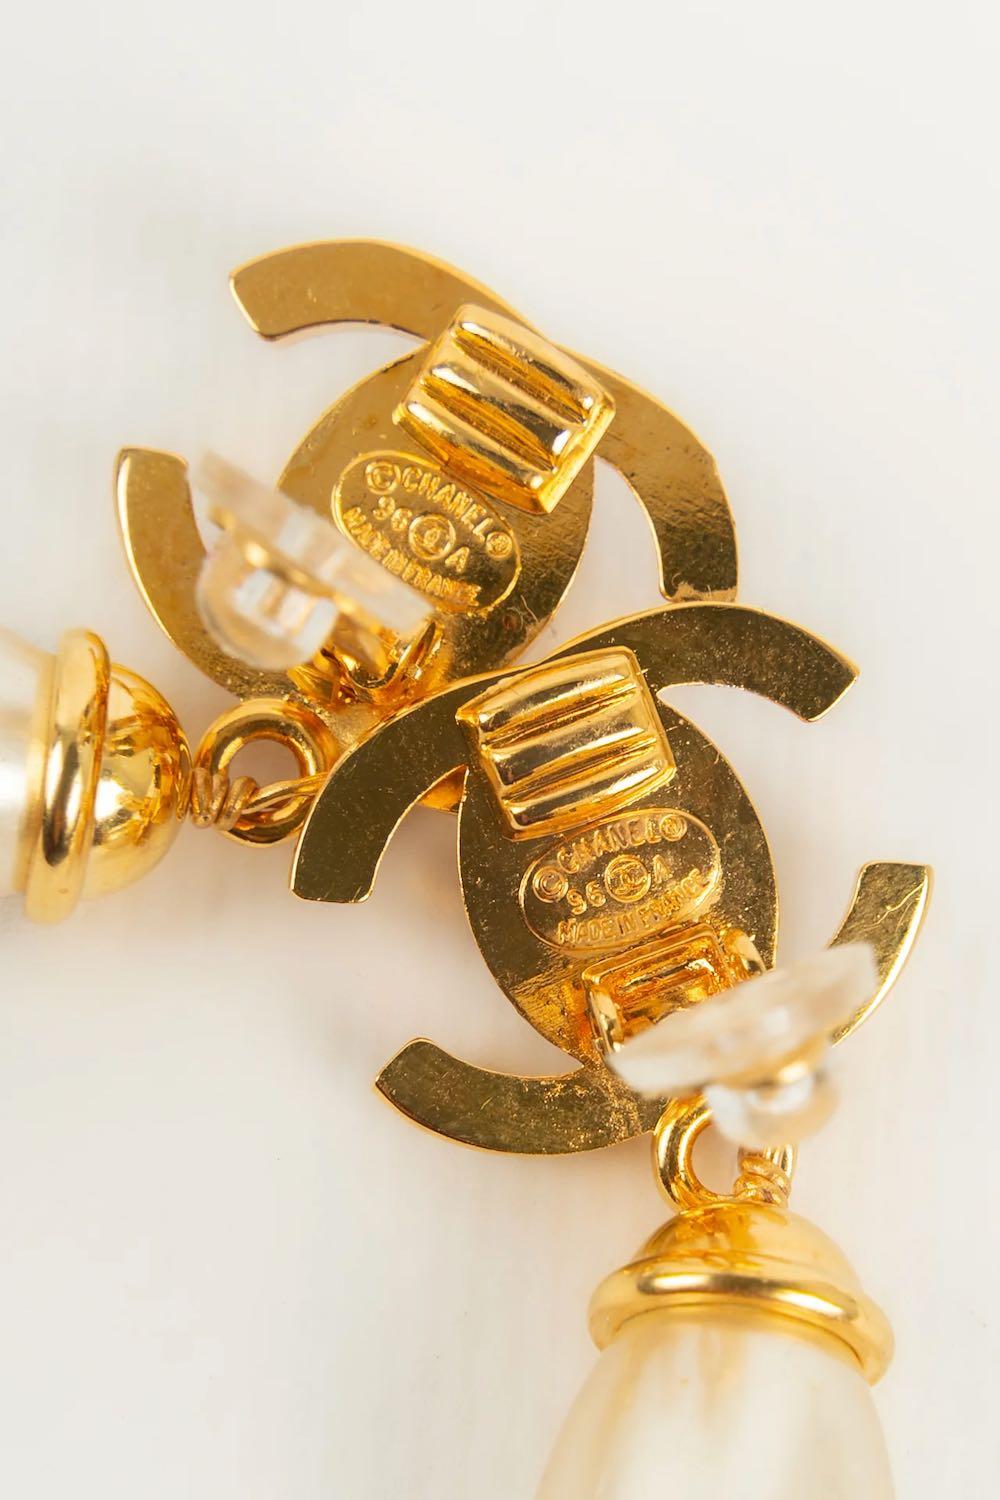 CHANEL - (Made in France) Clip earrings in gold-plated metal, Swarovski rhinestones and pearl fantasy. Autumn-Winter 1996 collection.

Condition :
Very good condition

Dimensions:
Length : 4,8 cm